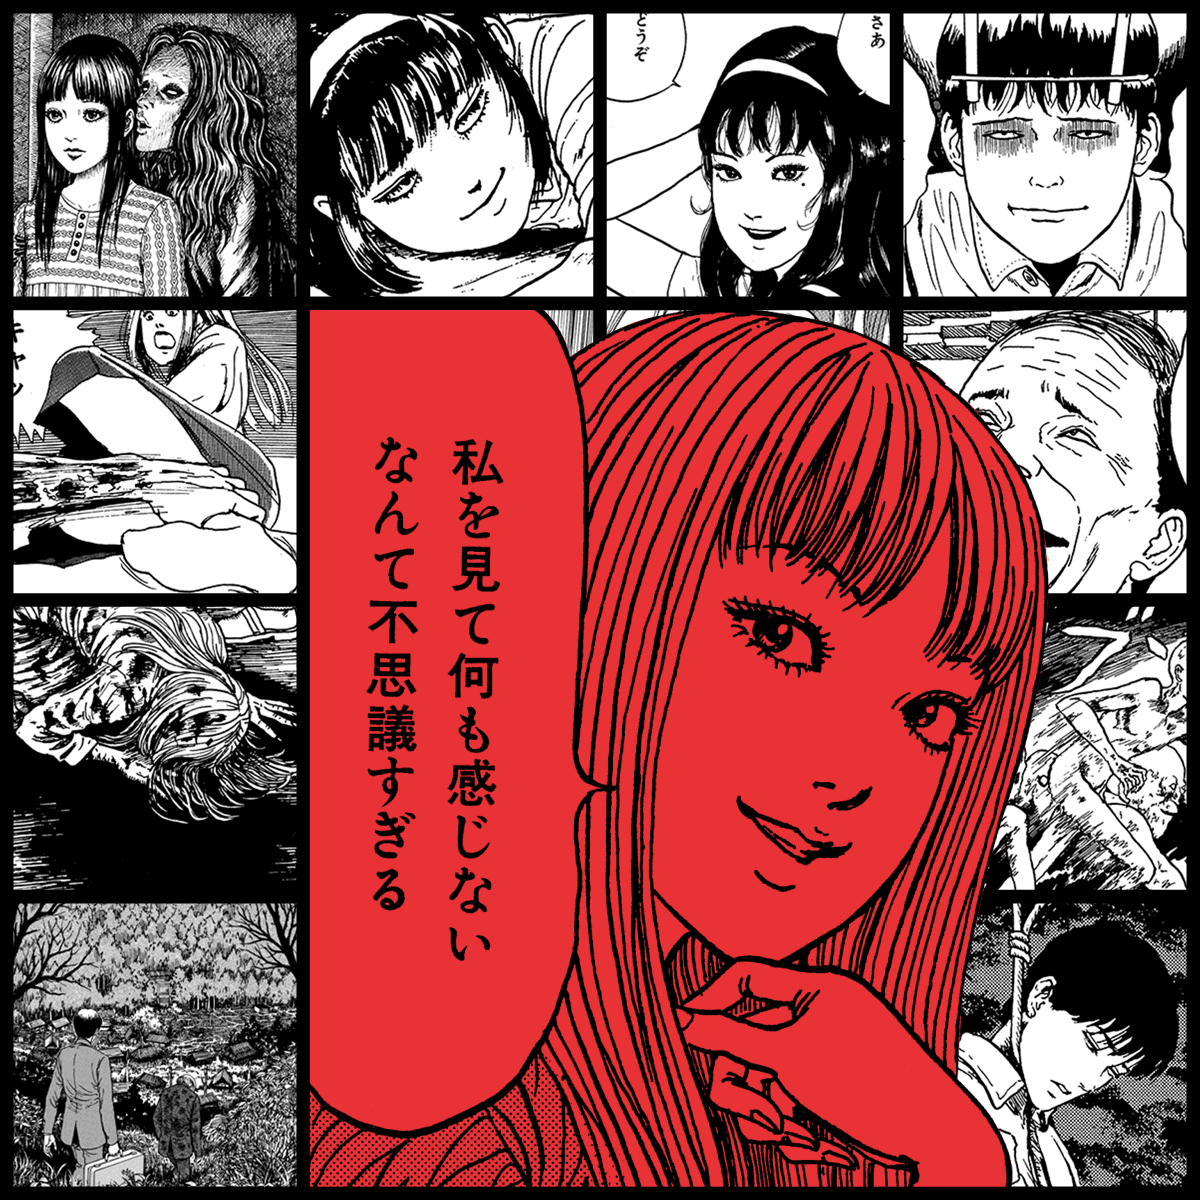 TOMIE by Junji Ito #88